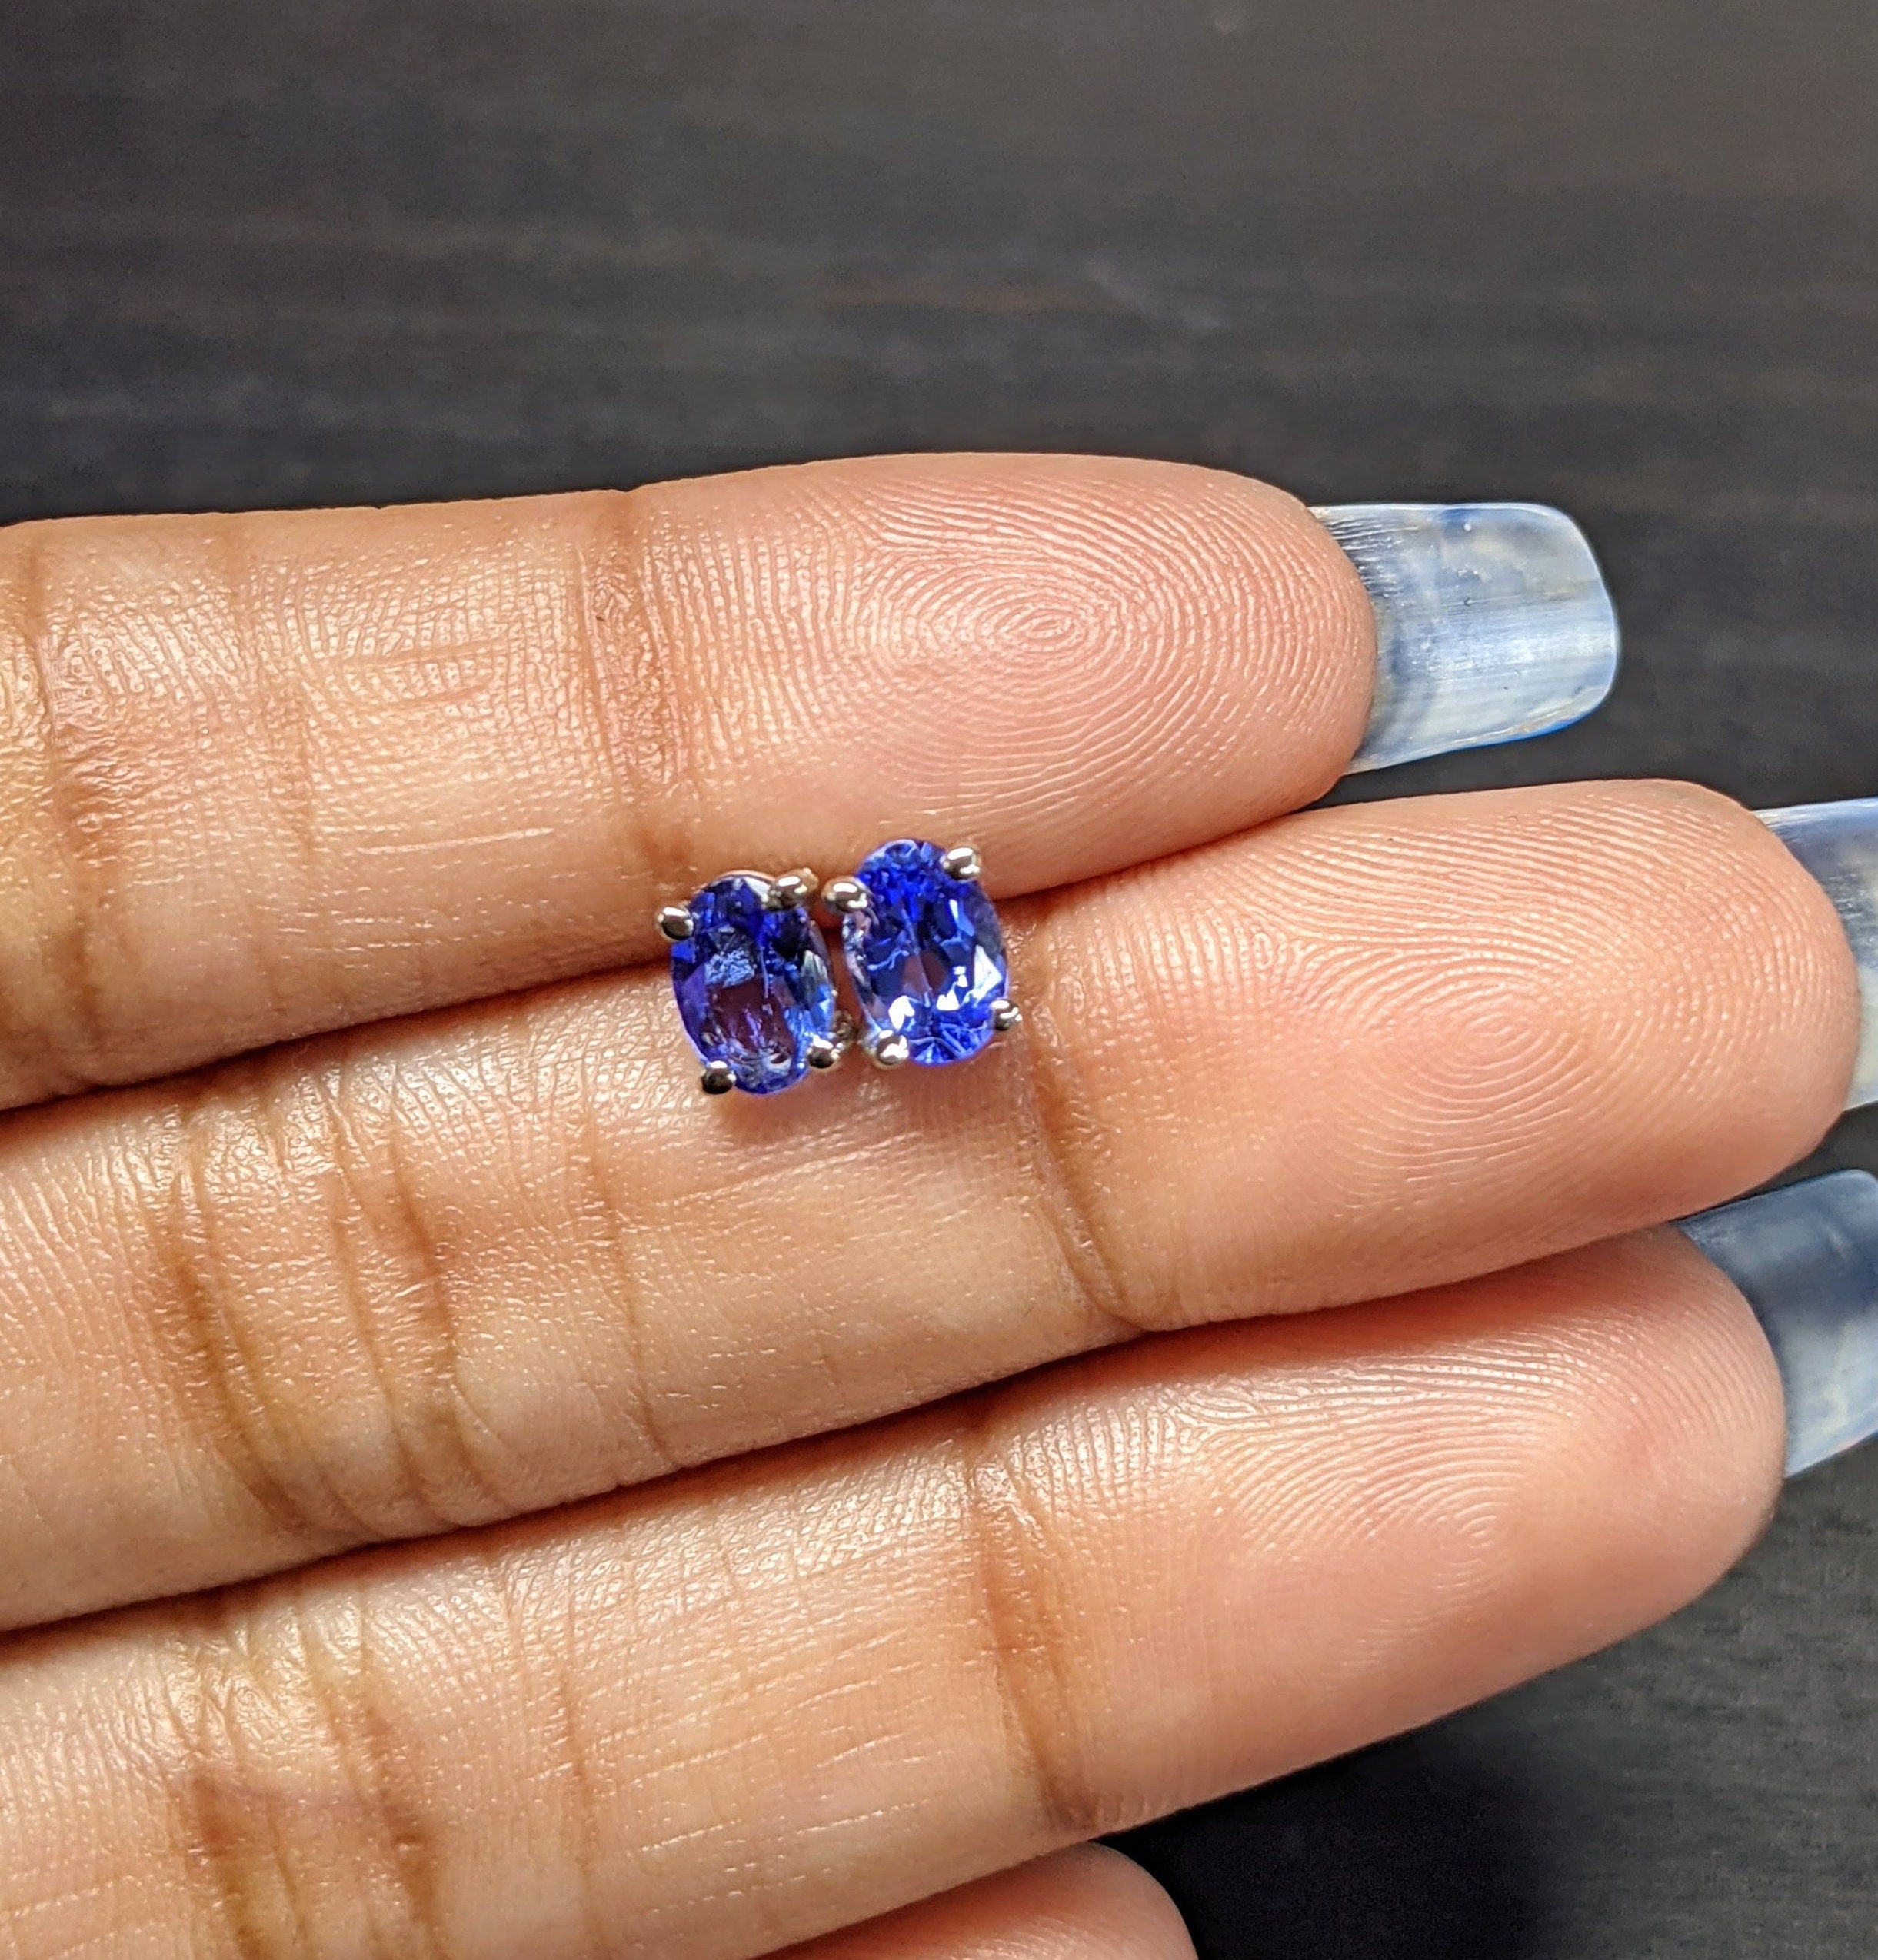 Tanzanite Earring Studs in 14K Solid White, Yellow or Rose Gold | Oval 6x4mm, 7x5mm | December Birthstone | Minimalist | Ready to Ship!